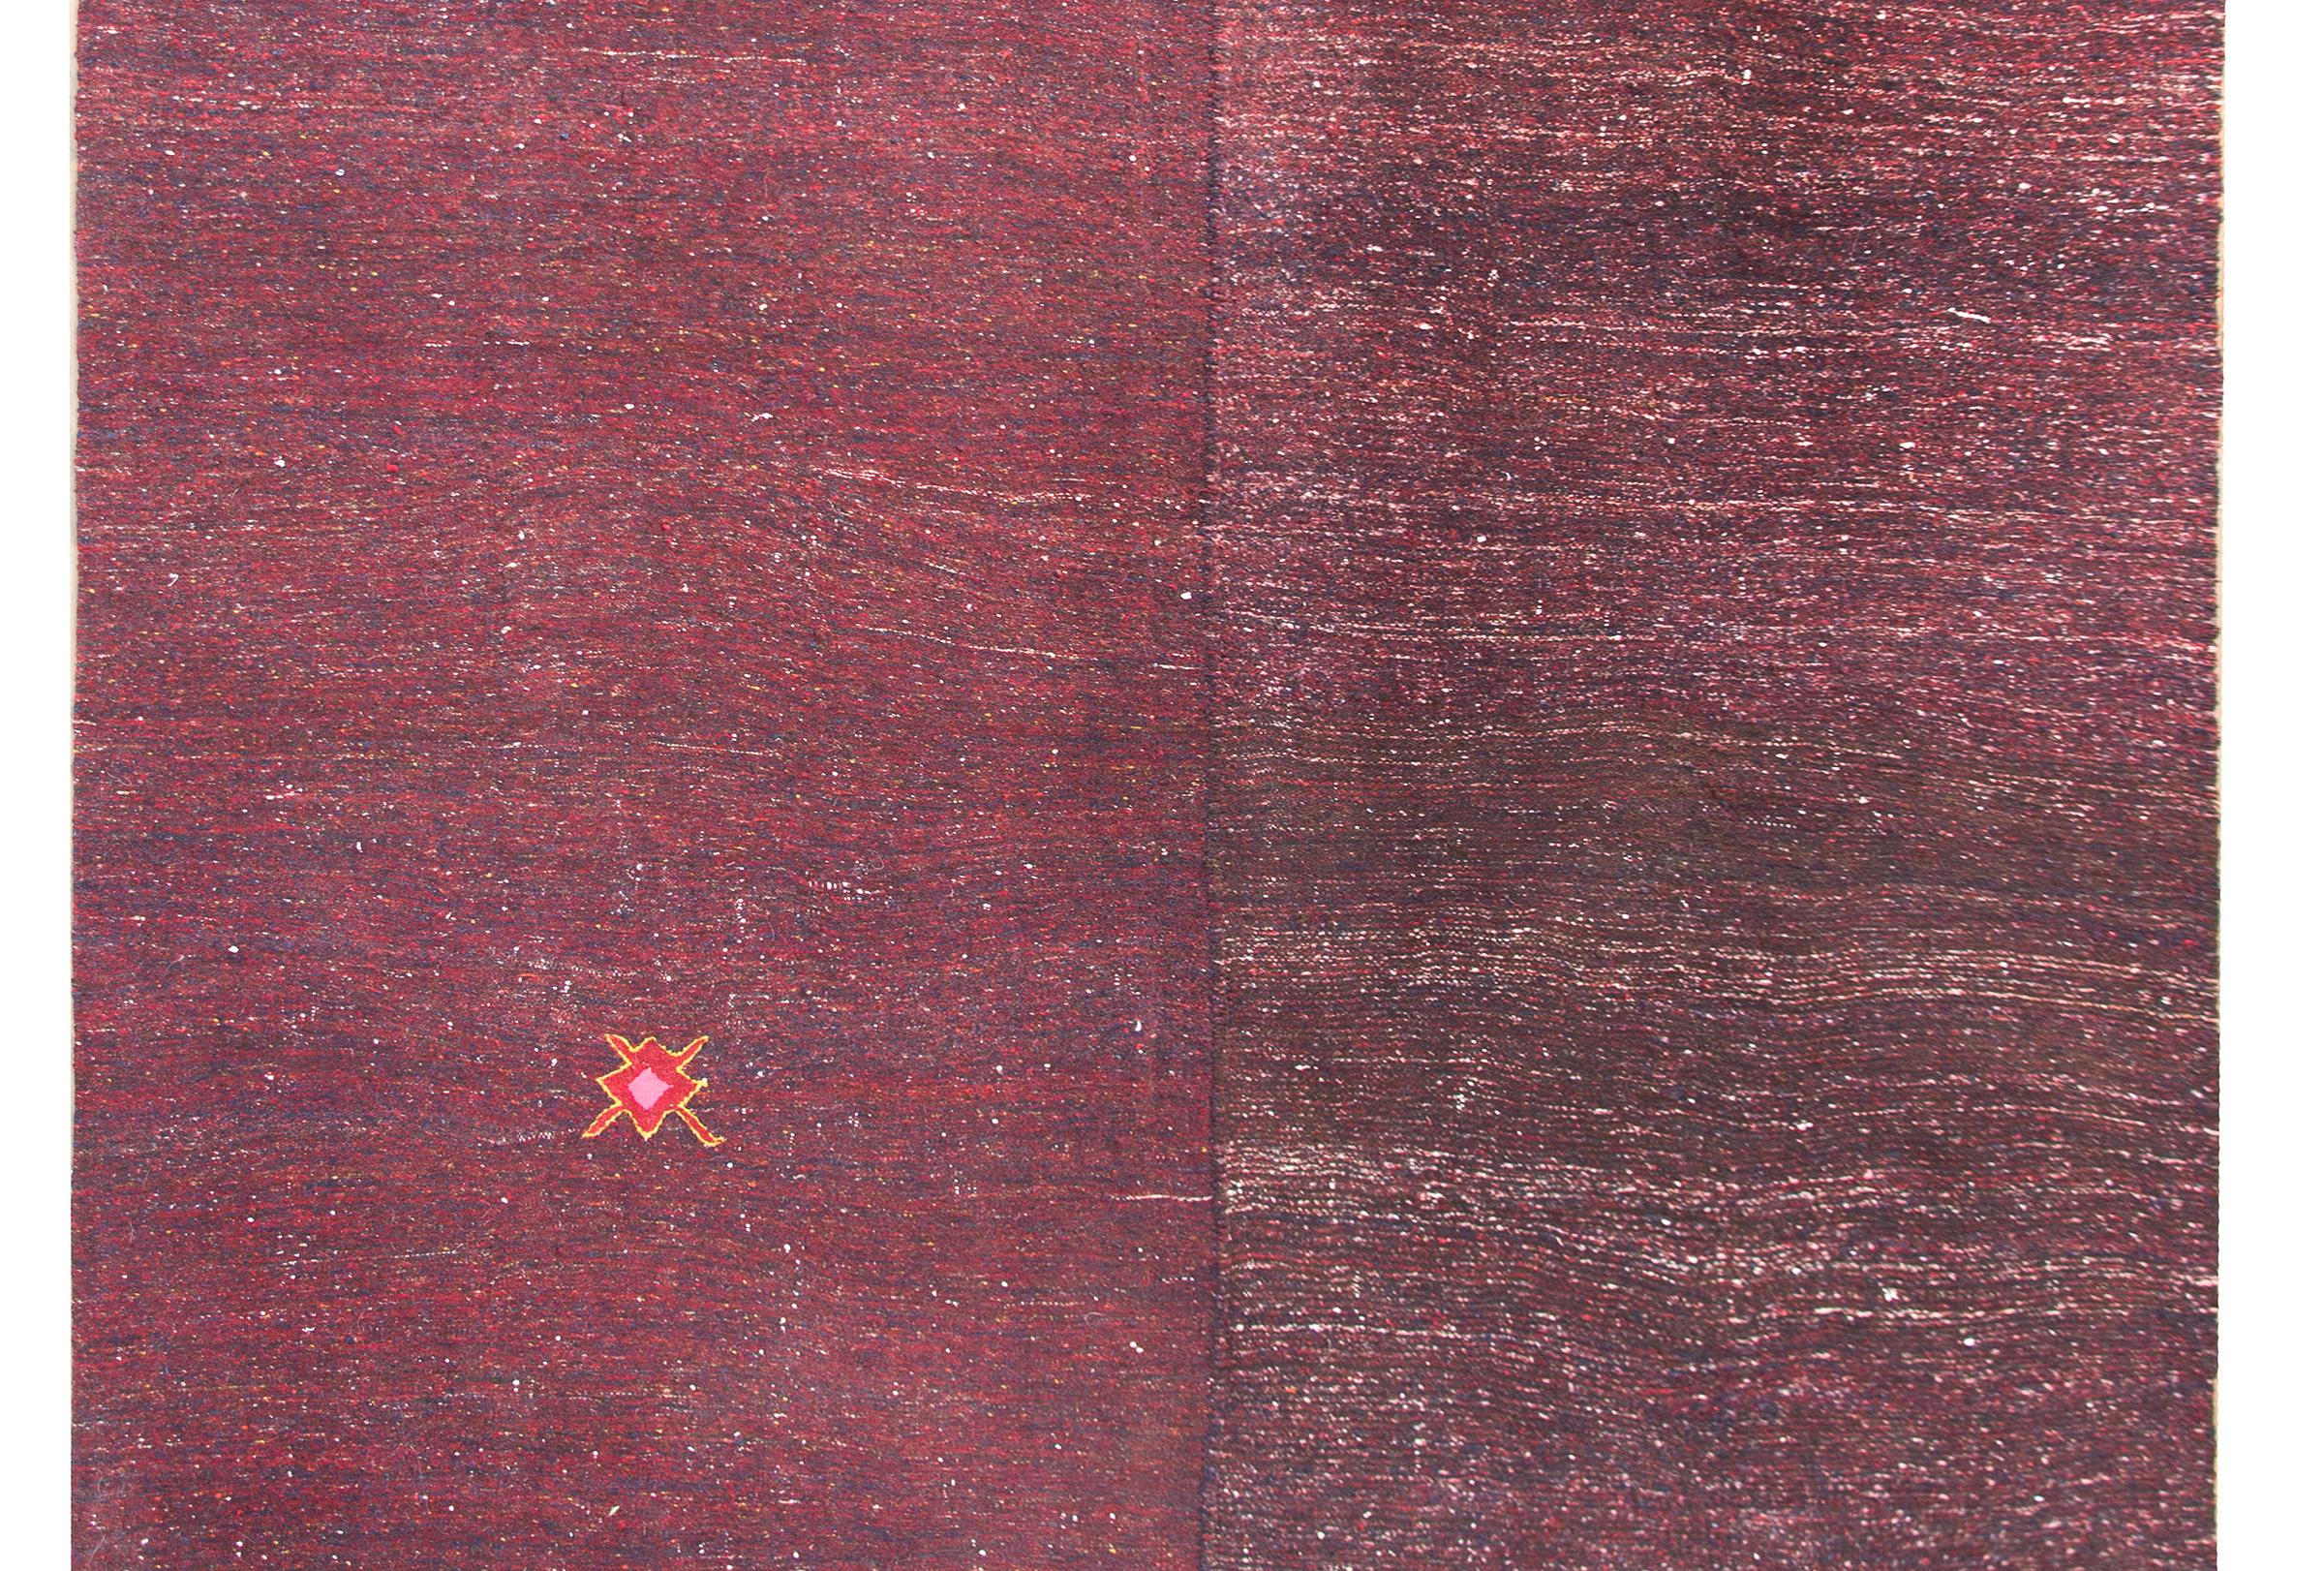 A simple but chic mid-20th century Persian Gabbeh kilim rug woven in crimson and indigo wool with a wonderful stylized flower and simple whip stitched edge trim.  Composed of two panels stitched together.